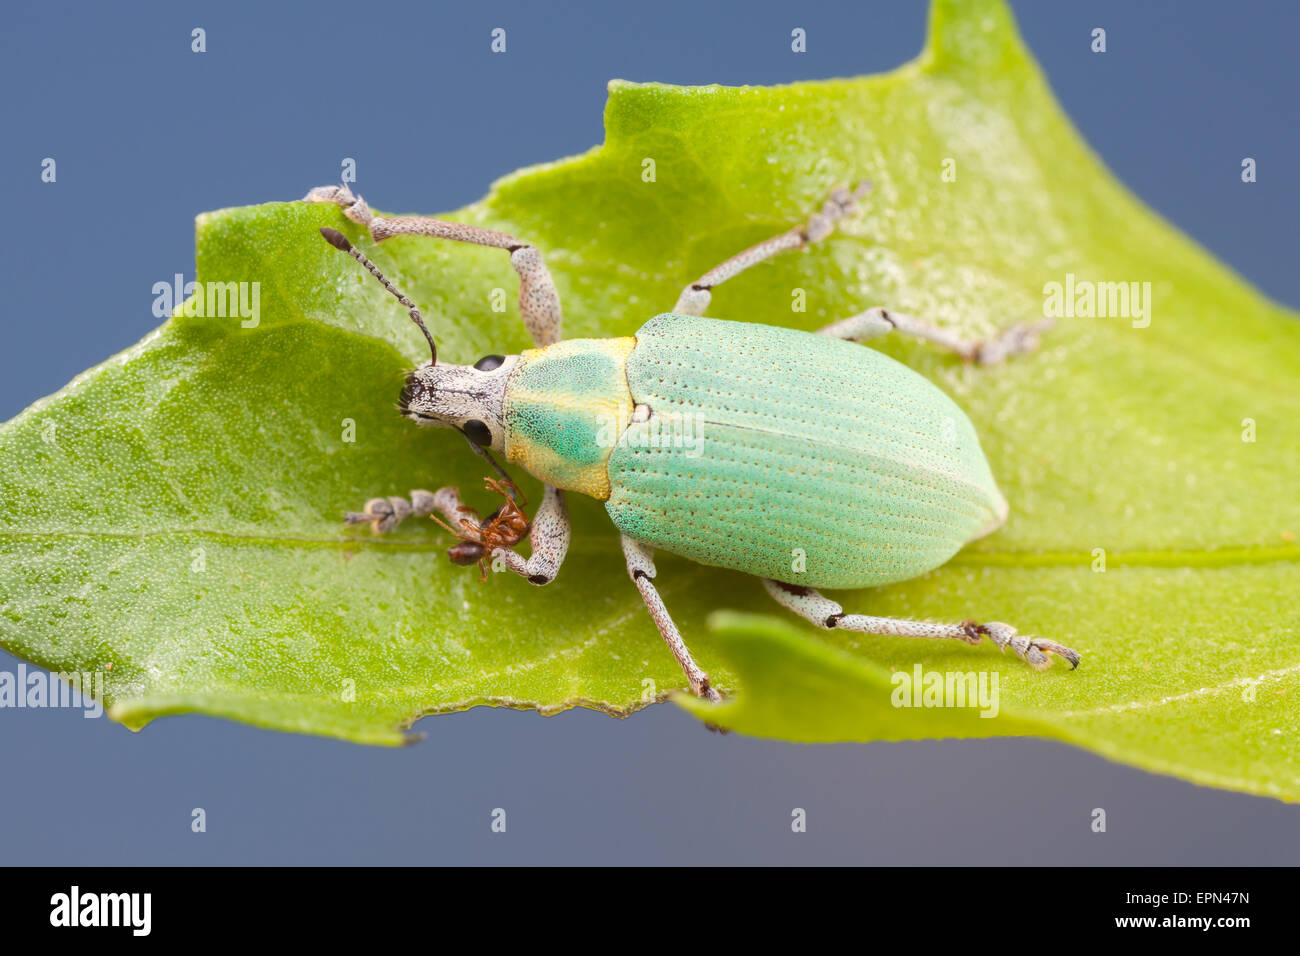 A Blue-green Citrus Root Weevil (Pachnaeus litus) perches on a leaf. Stock Photo